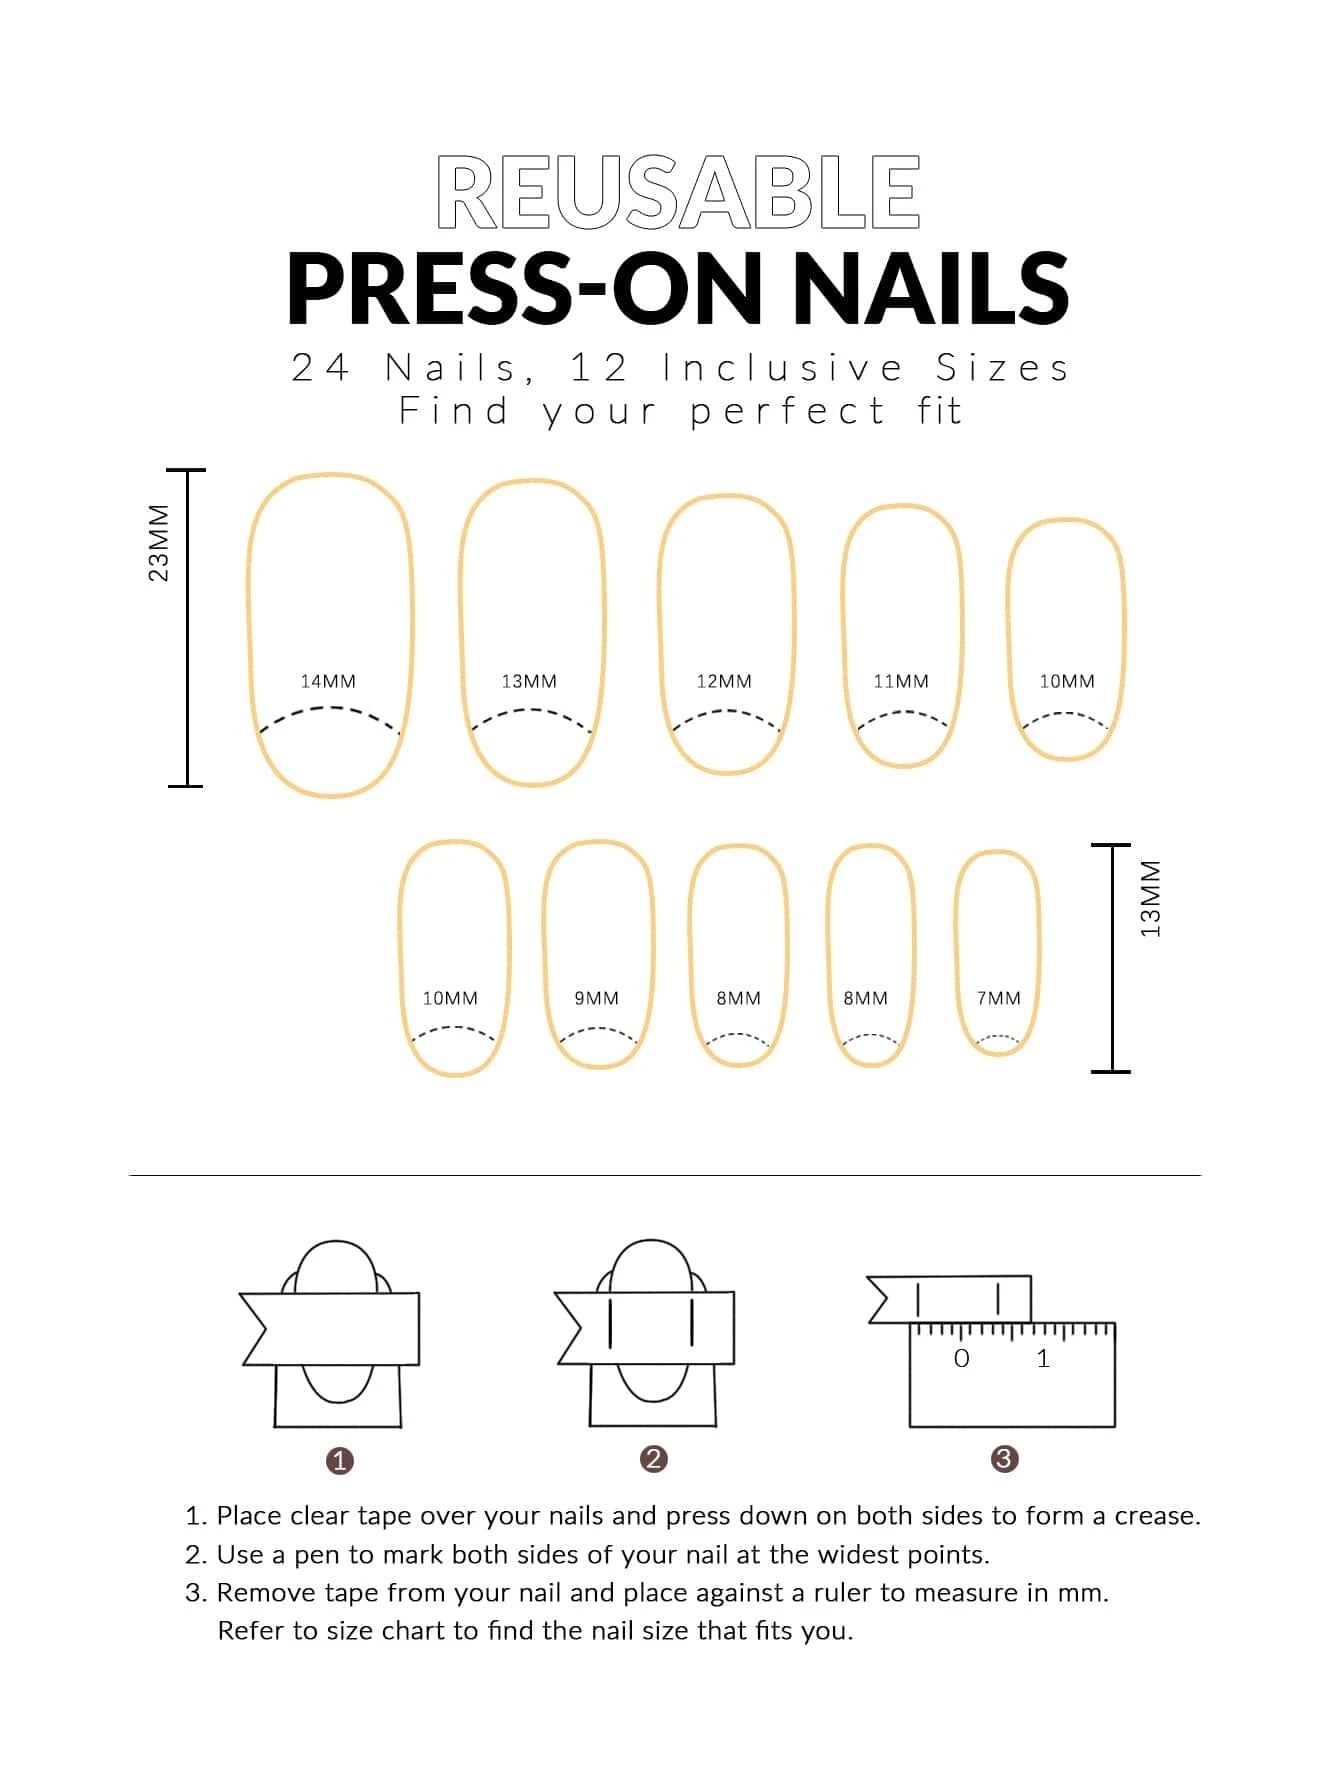 Don't Try Me 2 Long Square Beige Glossy Press On Nails